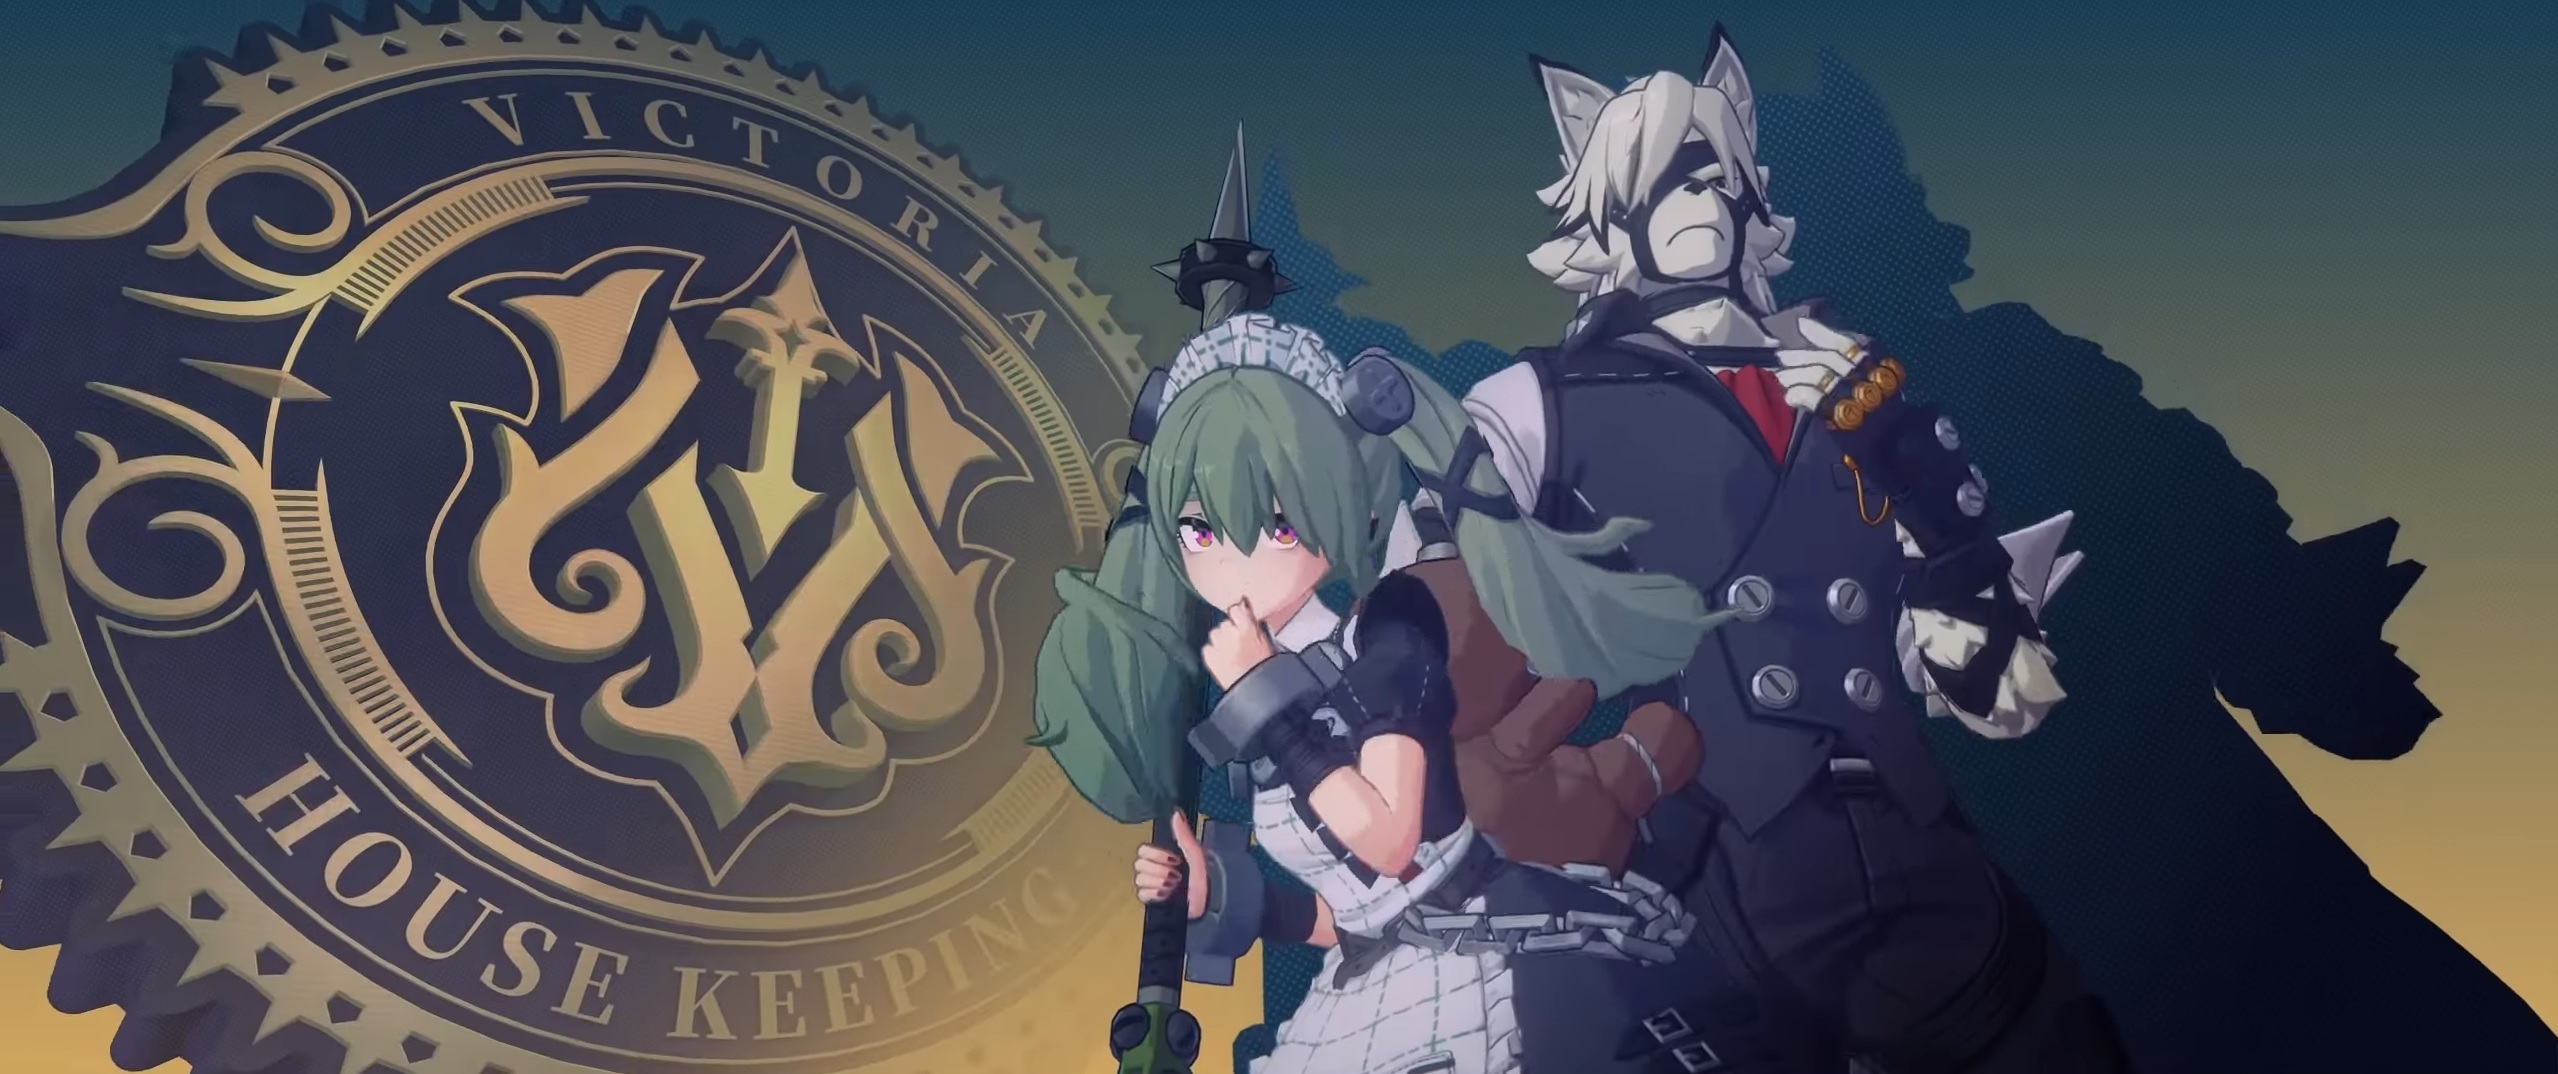 Zenless Zone Zero - A green haired girl in a maid uniform and a white fox man in a vest stand in front of a Victoria House Keeping insignia.